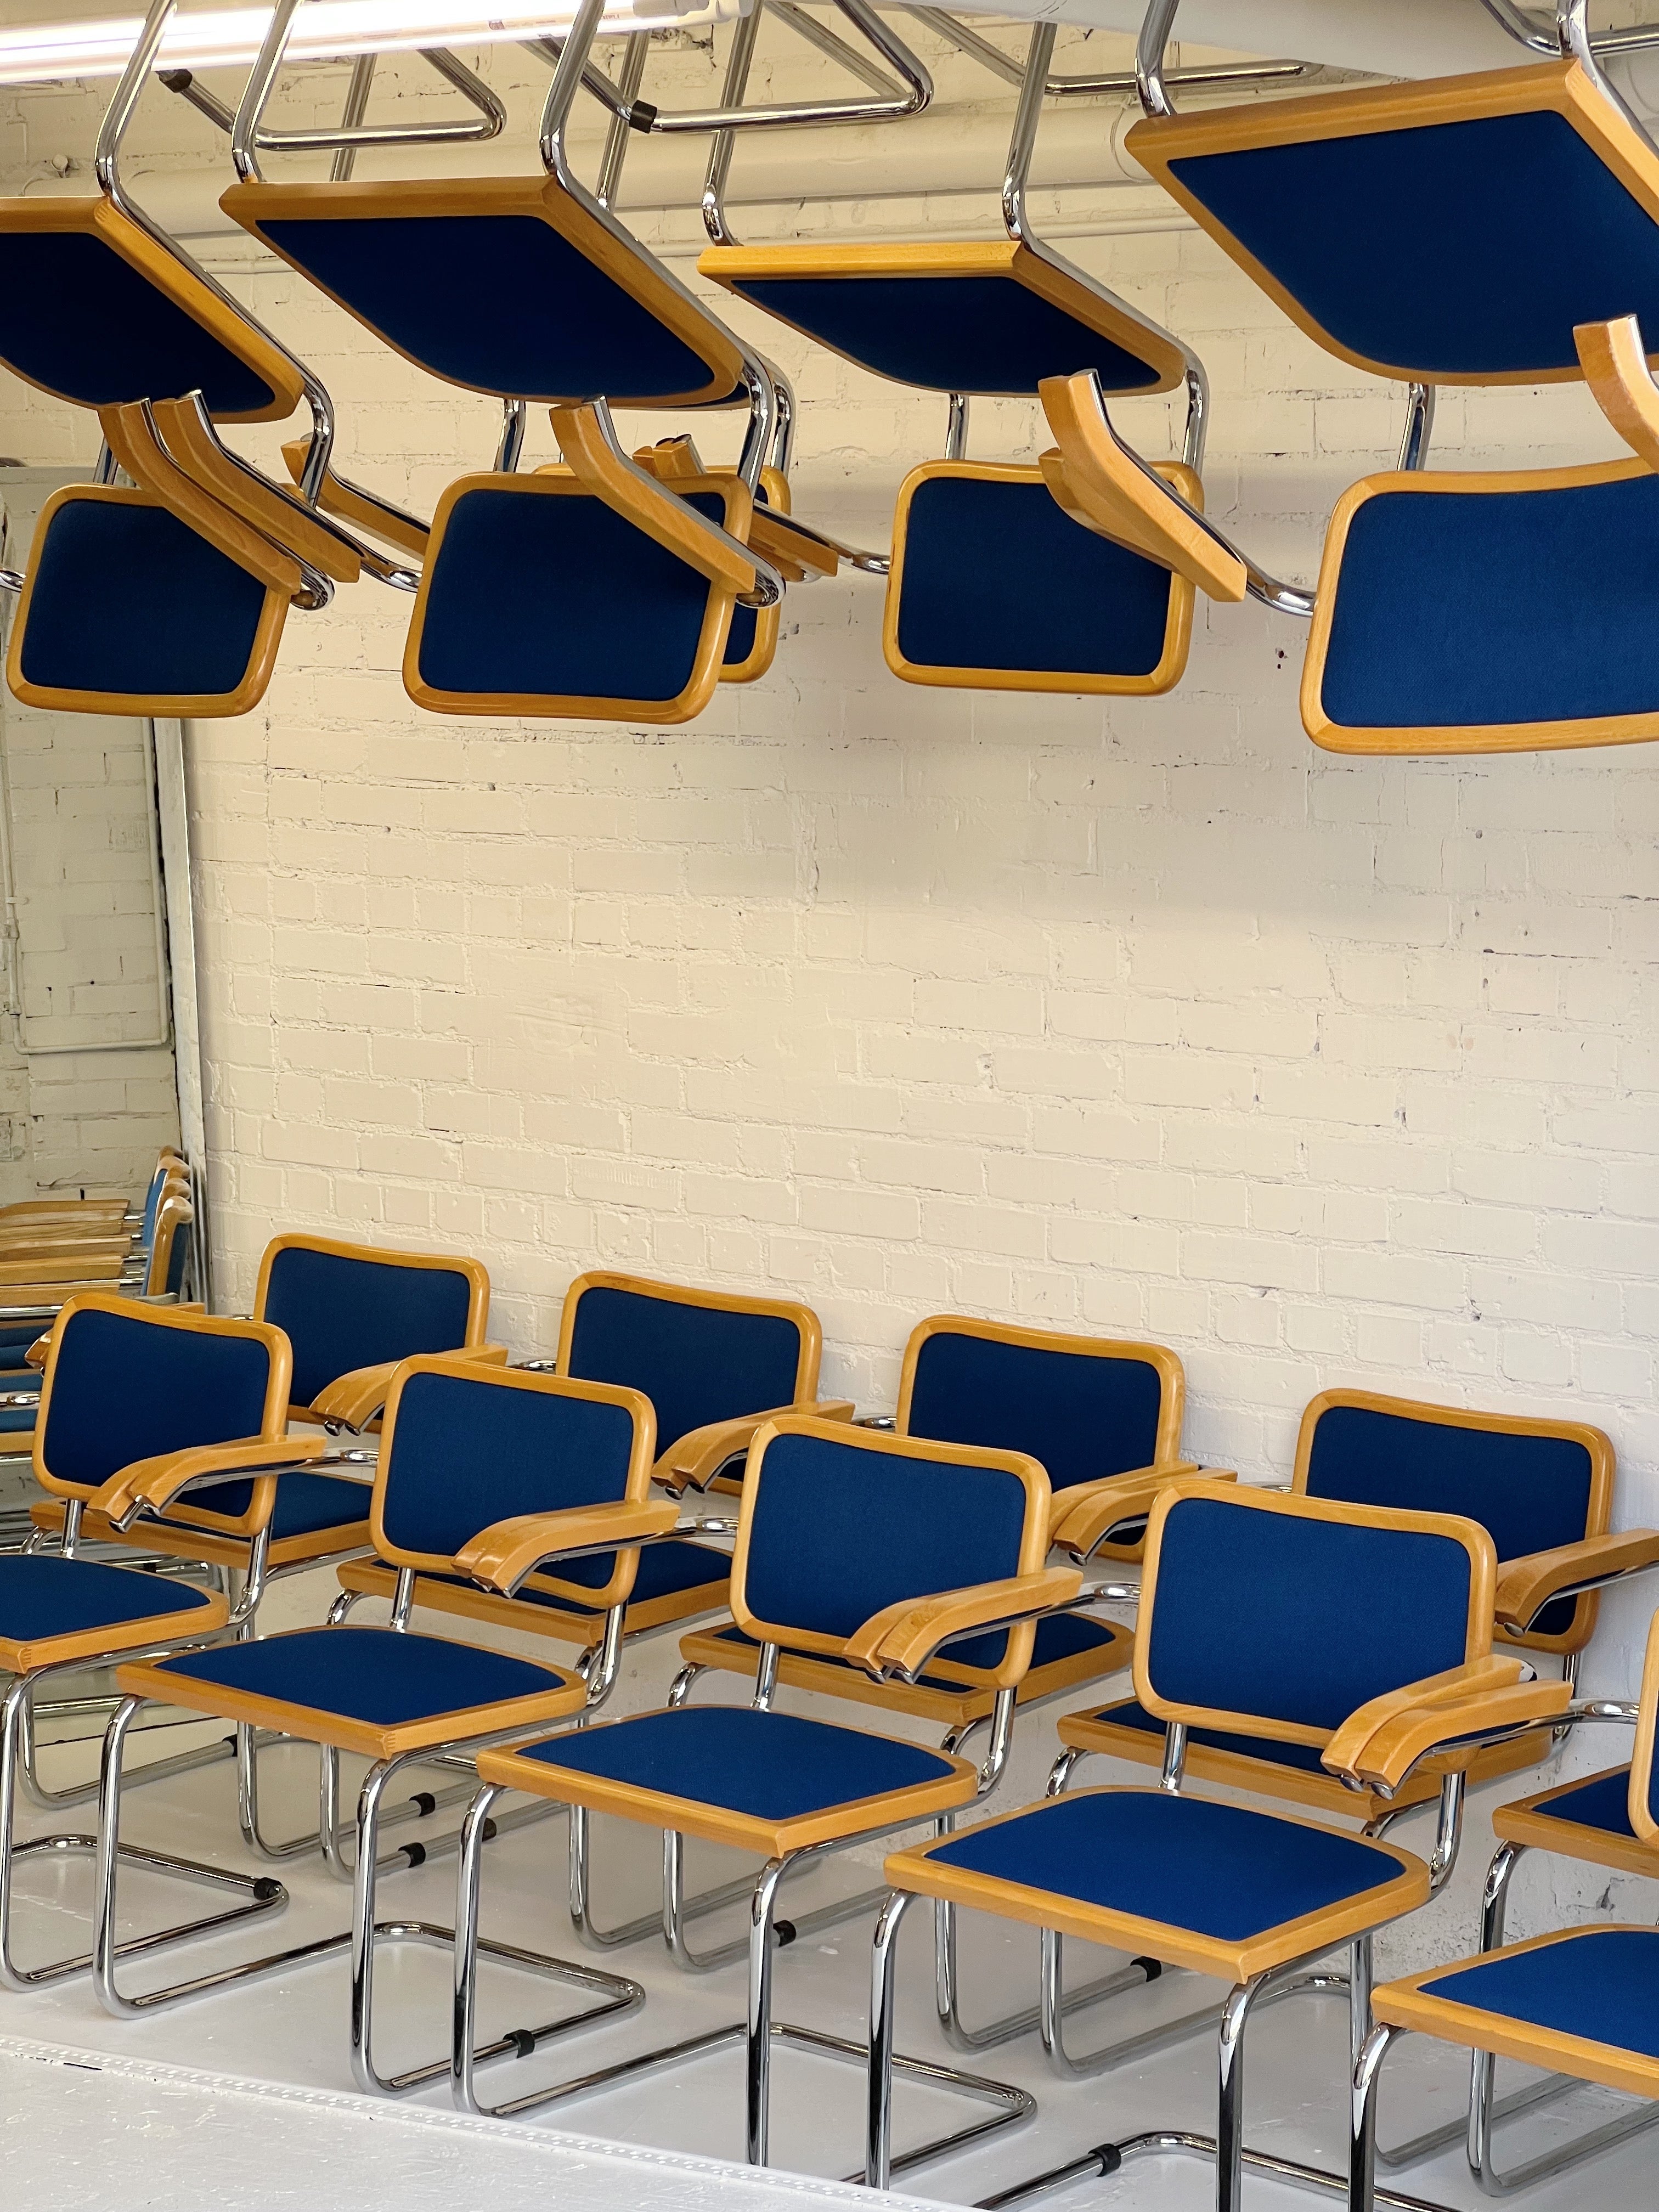 1980's Cecsa style dining chairs by Loewenstein. Rare cobalt blue upholstery with chrome frames, upper wood trim, and armrests. 30 available. All have armrests.

These were produced in 1983-1985 and have spent their days in a YWCA training center in